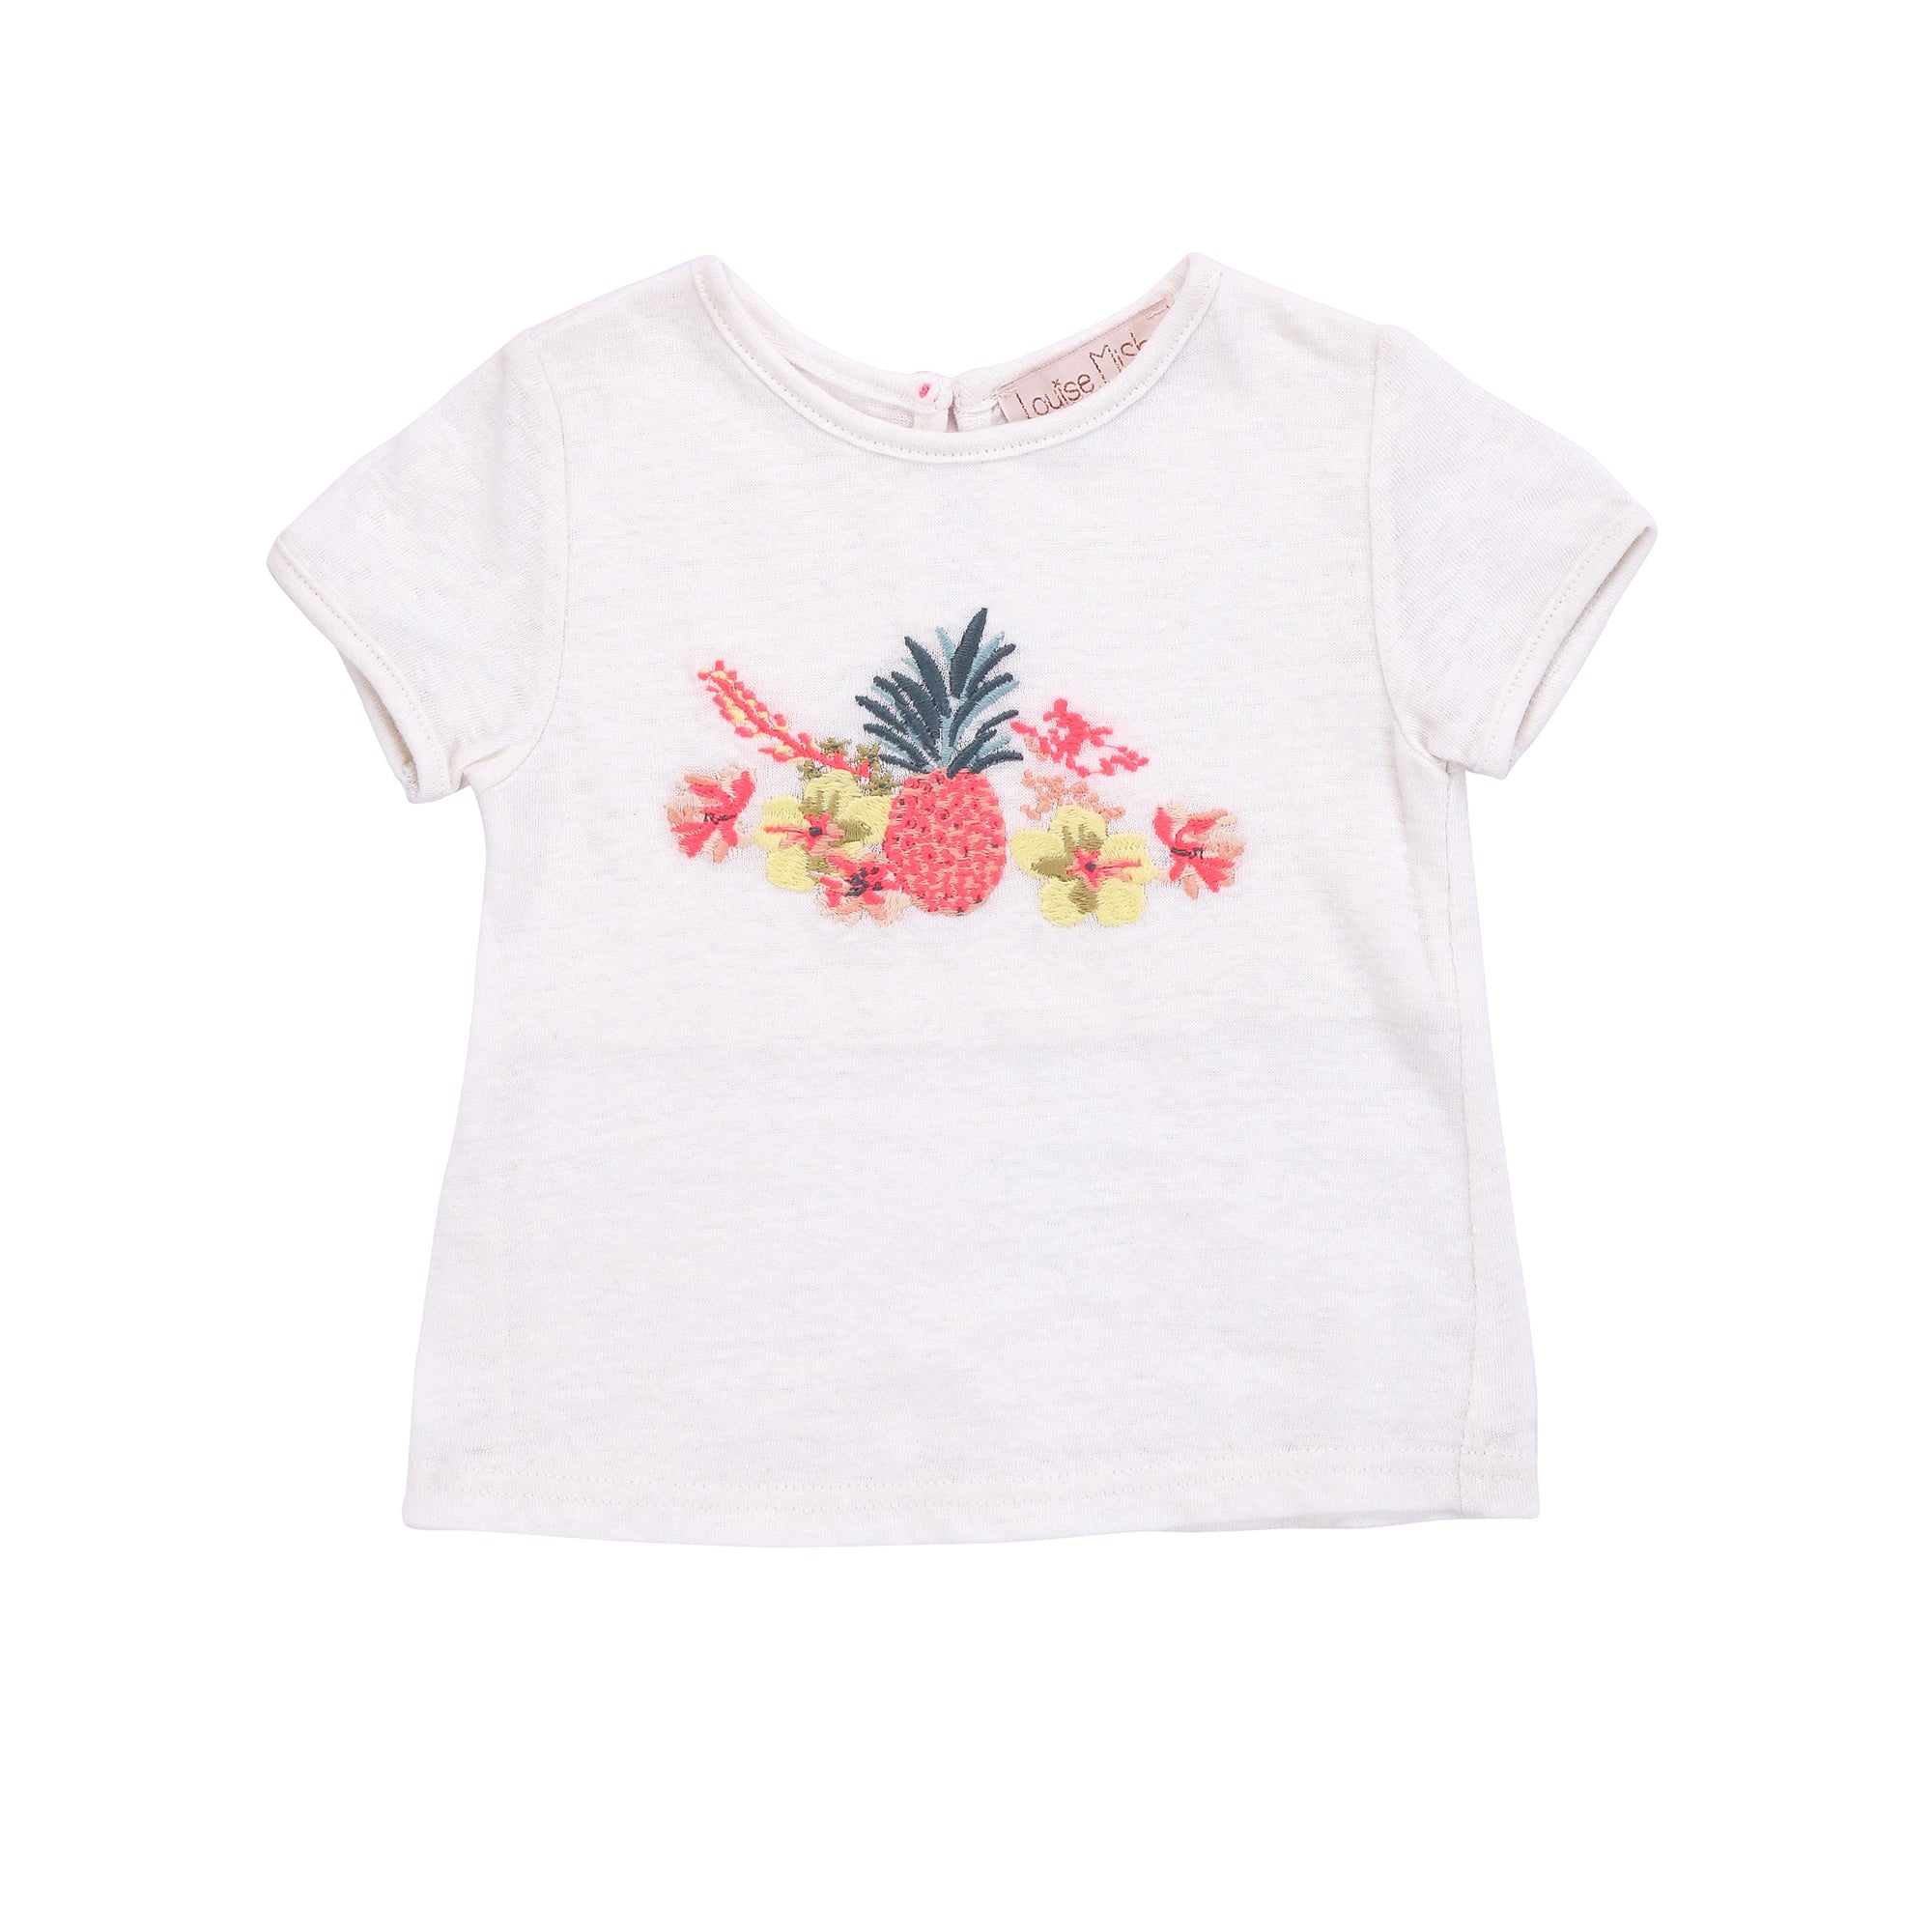 Girls White Embroidered T-shirt